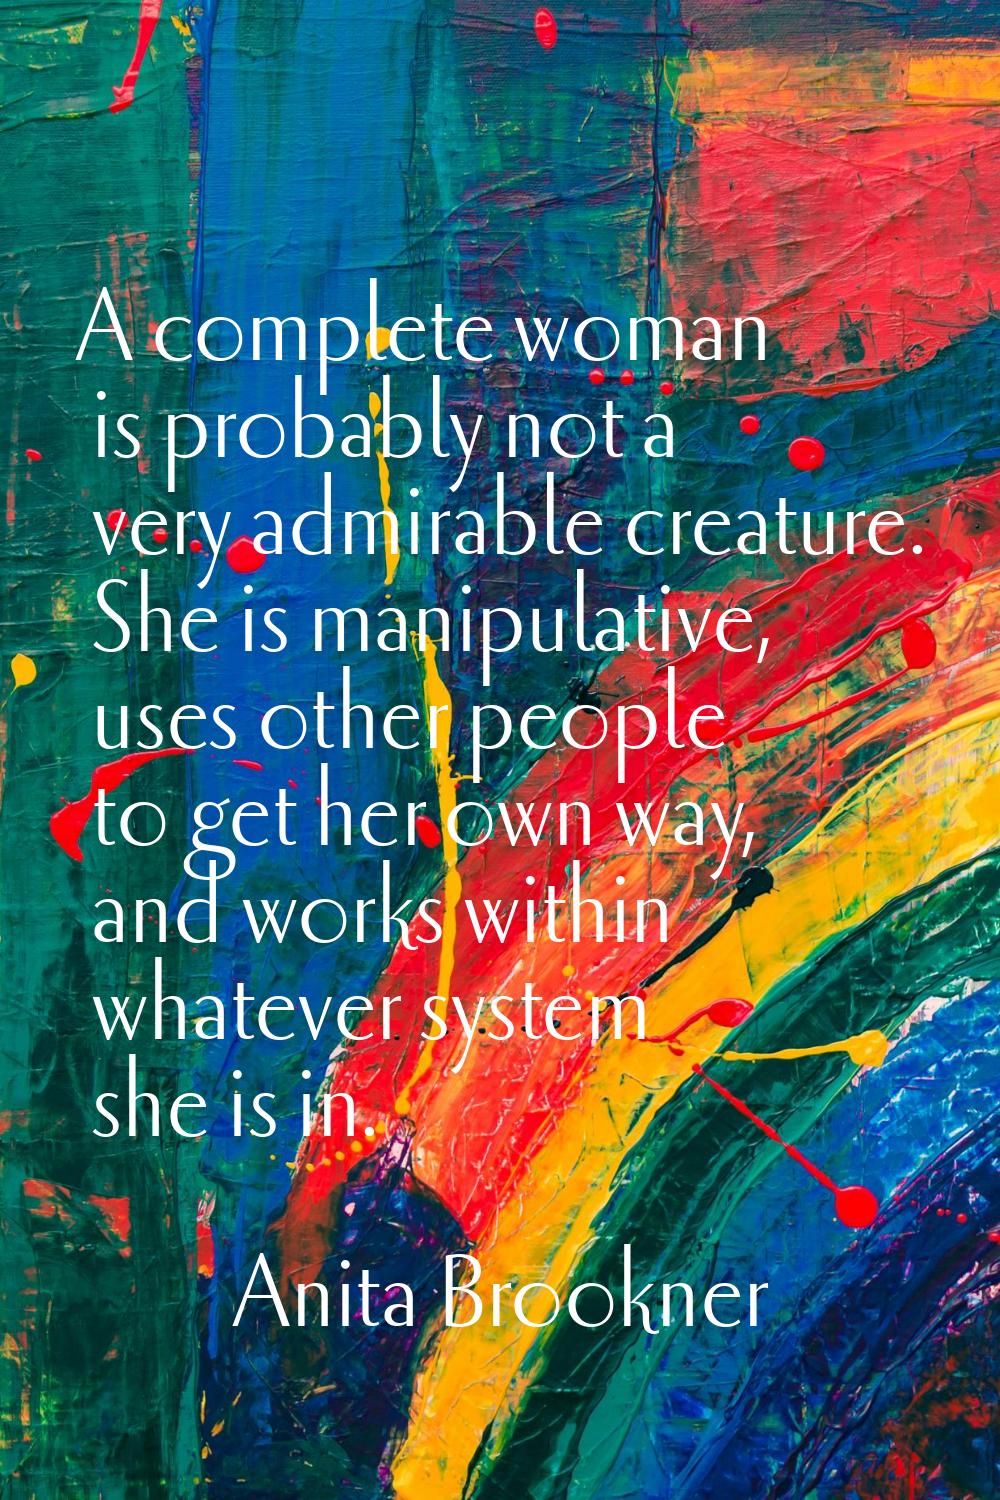 A complete woman is probably not a very admirable creature. She is manipulative, uses other people 